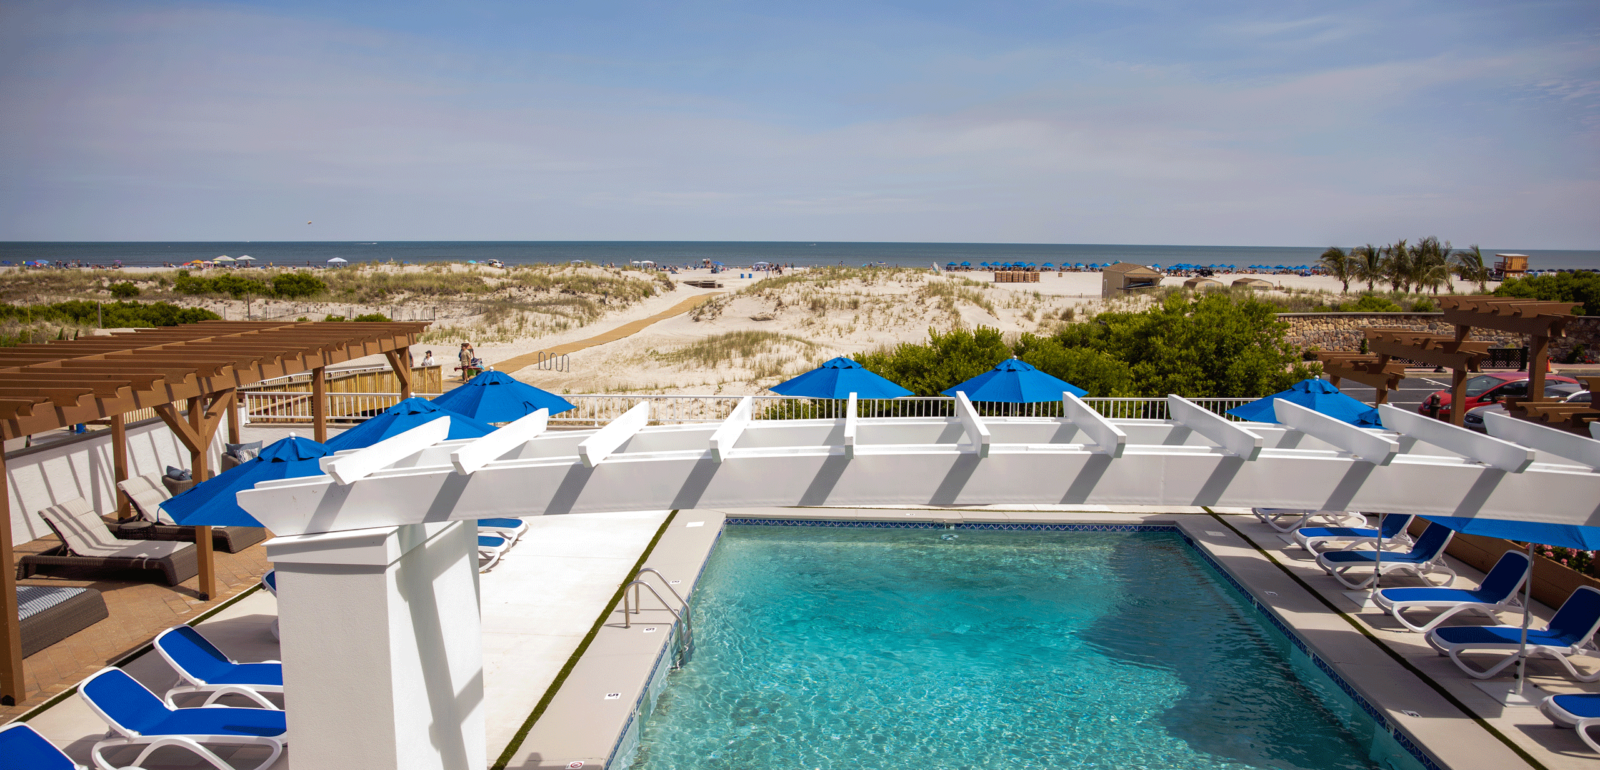 The accessible swimming pool at our Diamond Beach NJ resort